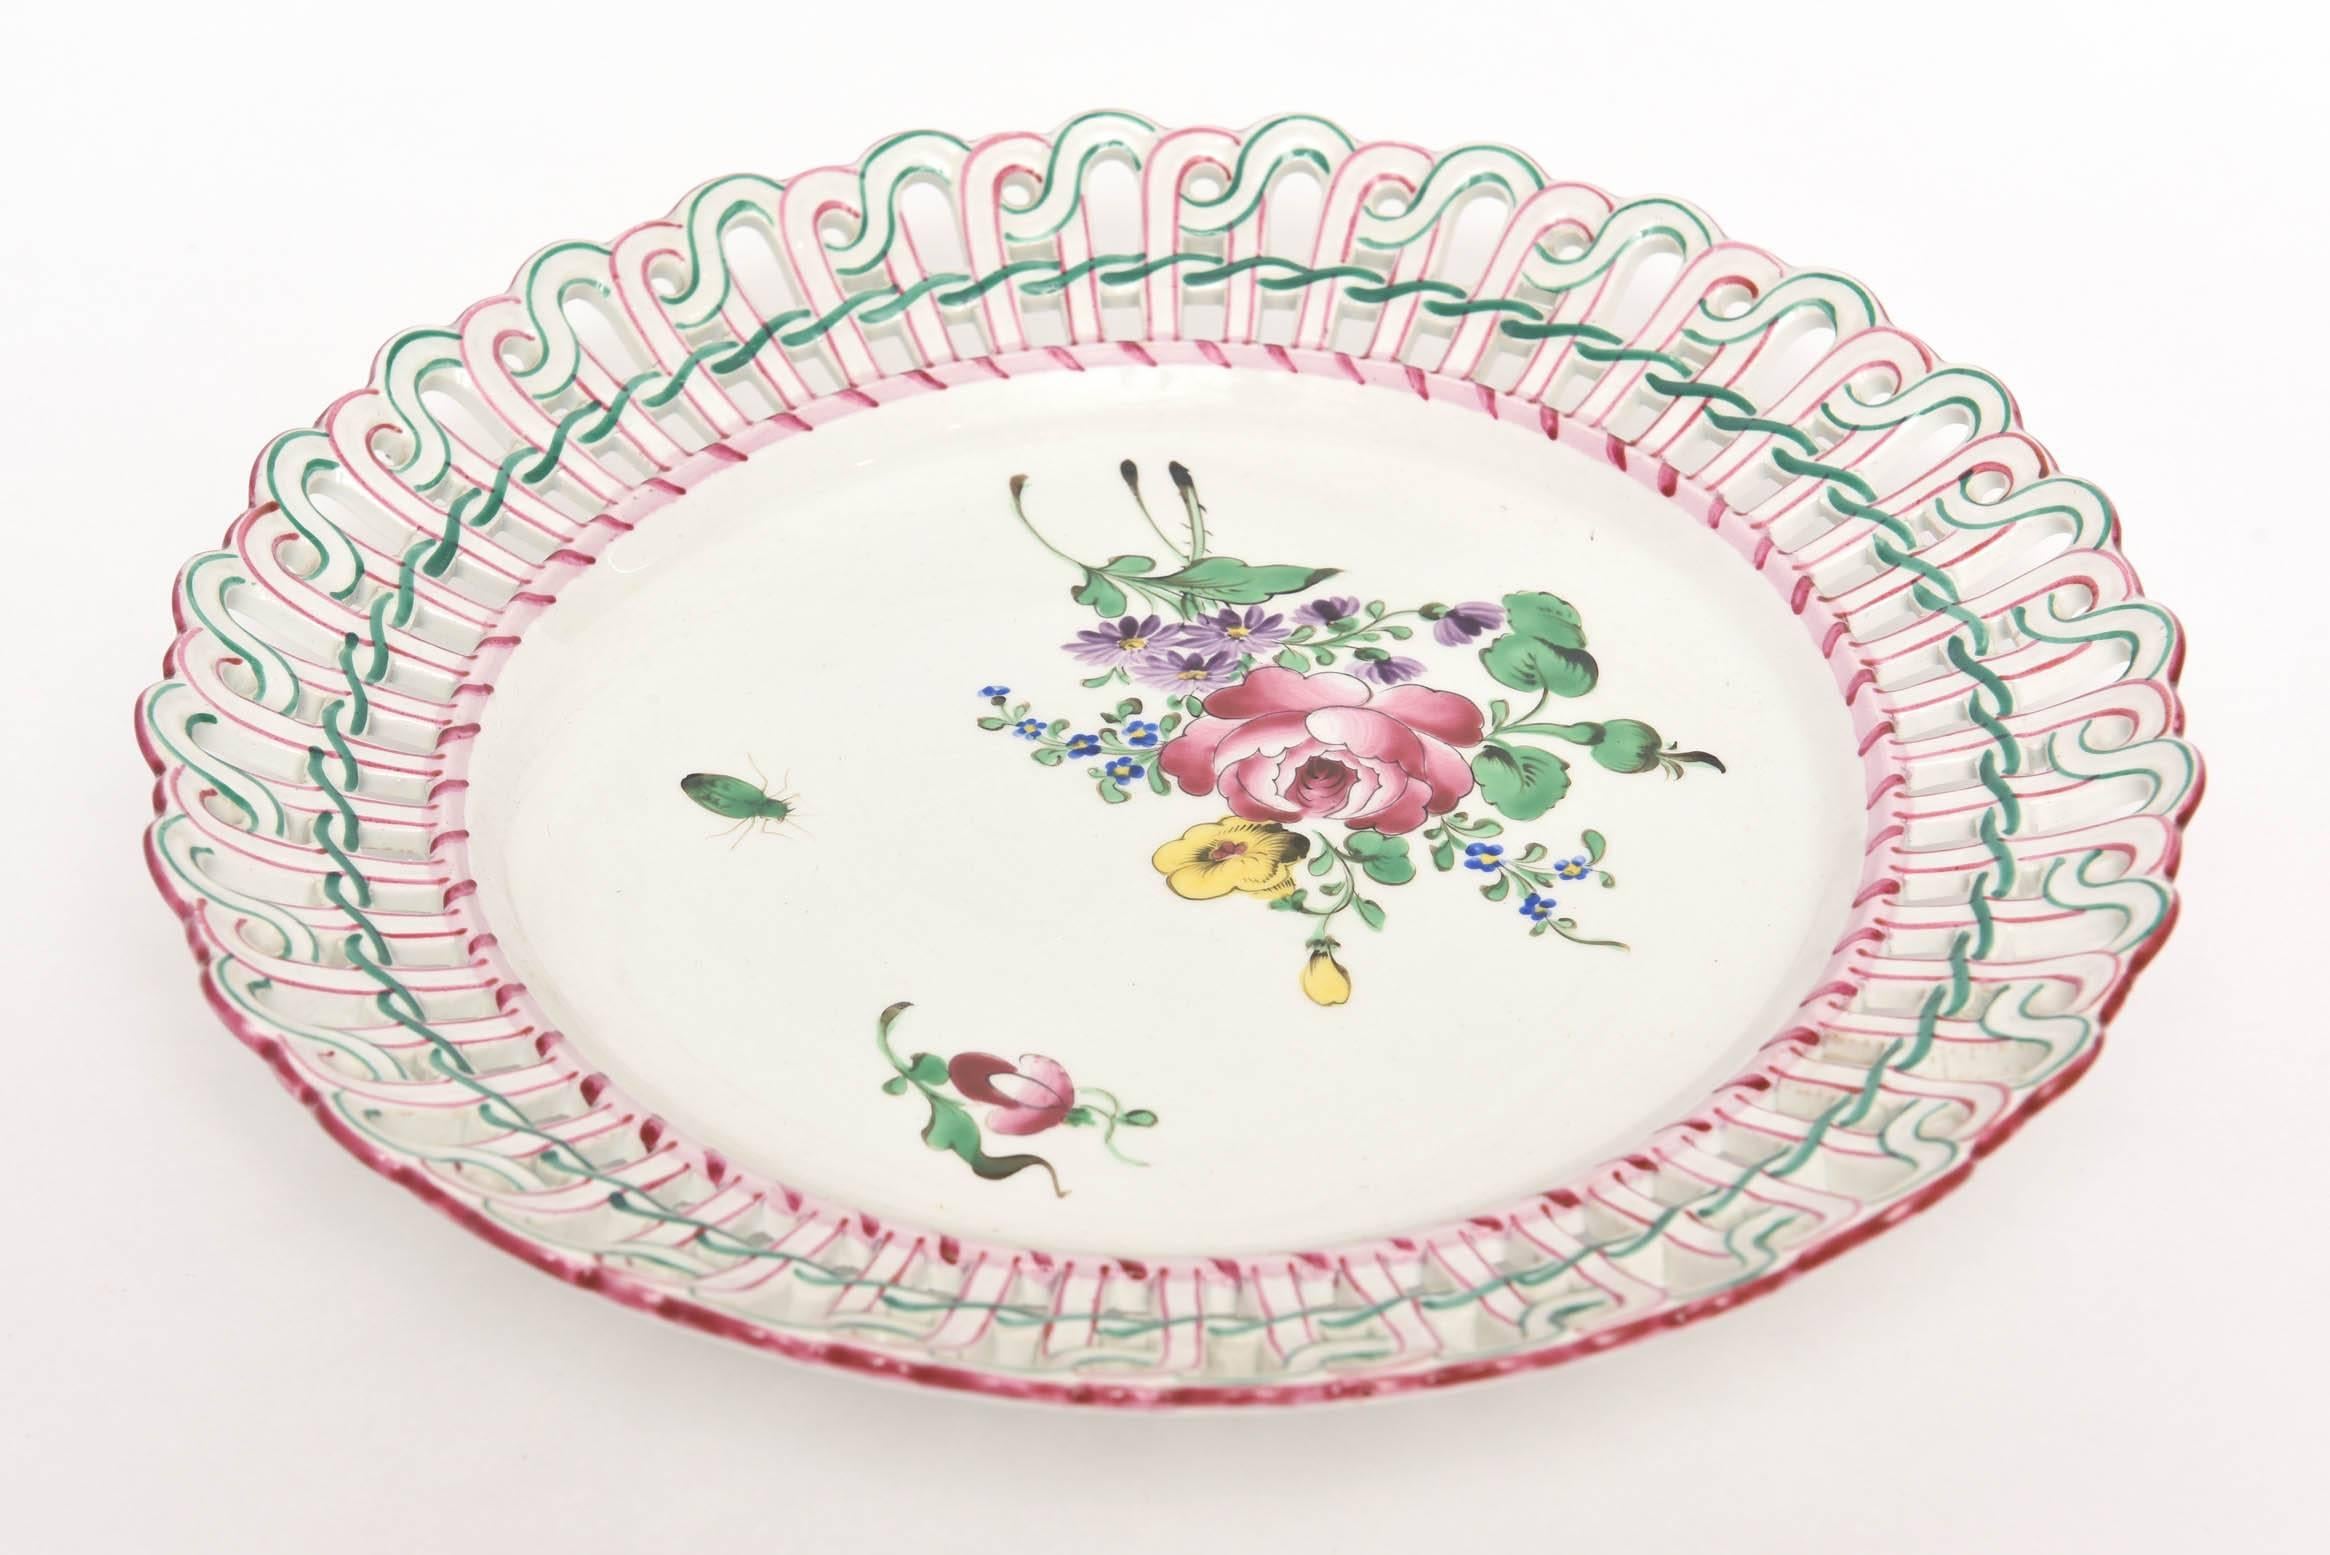 12 Luneville, France Reticulated Hand-Painted Plates, Rare Pink Green Collars 1